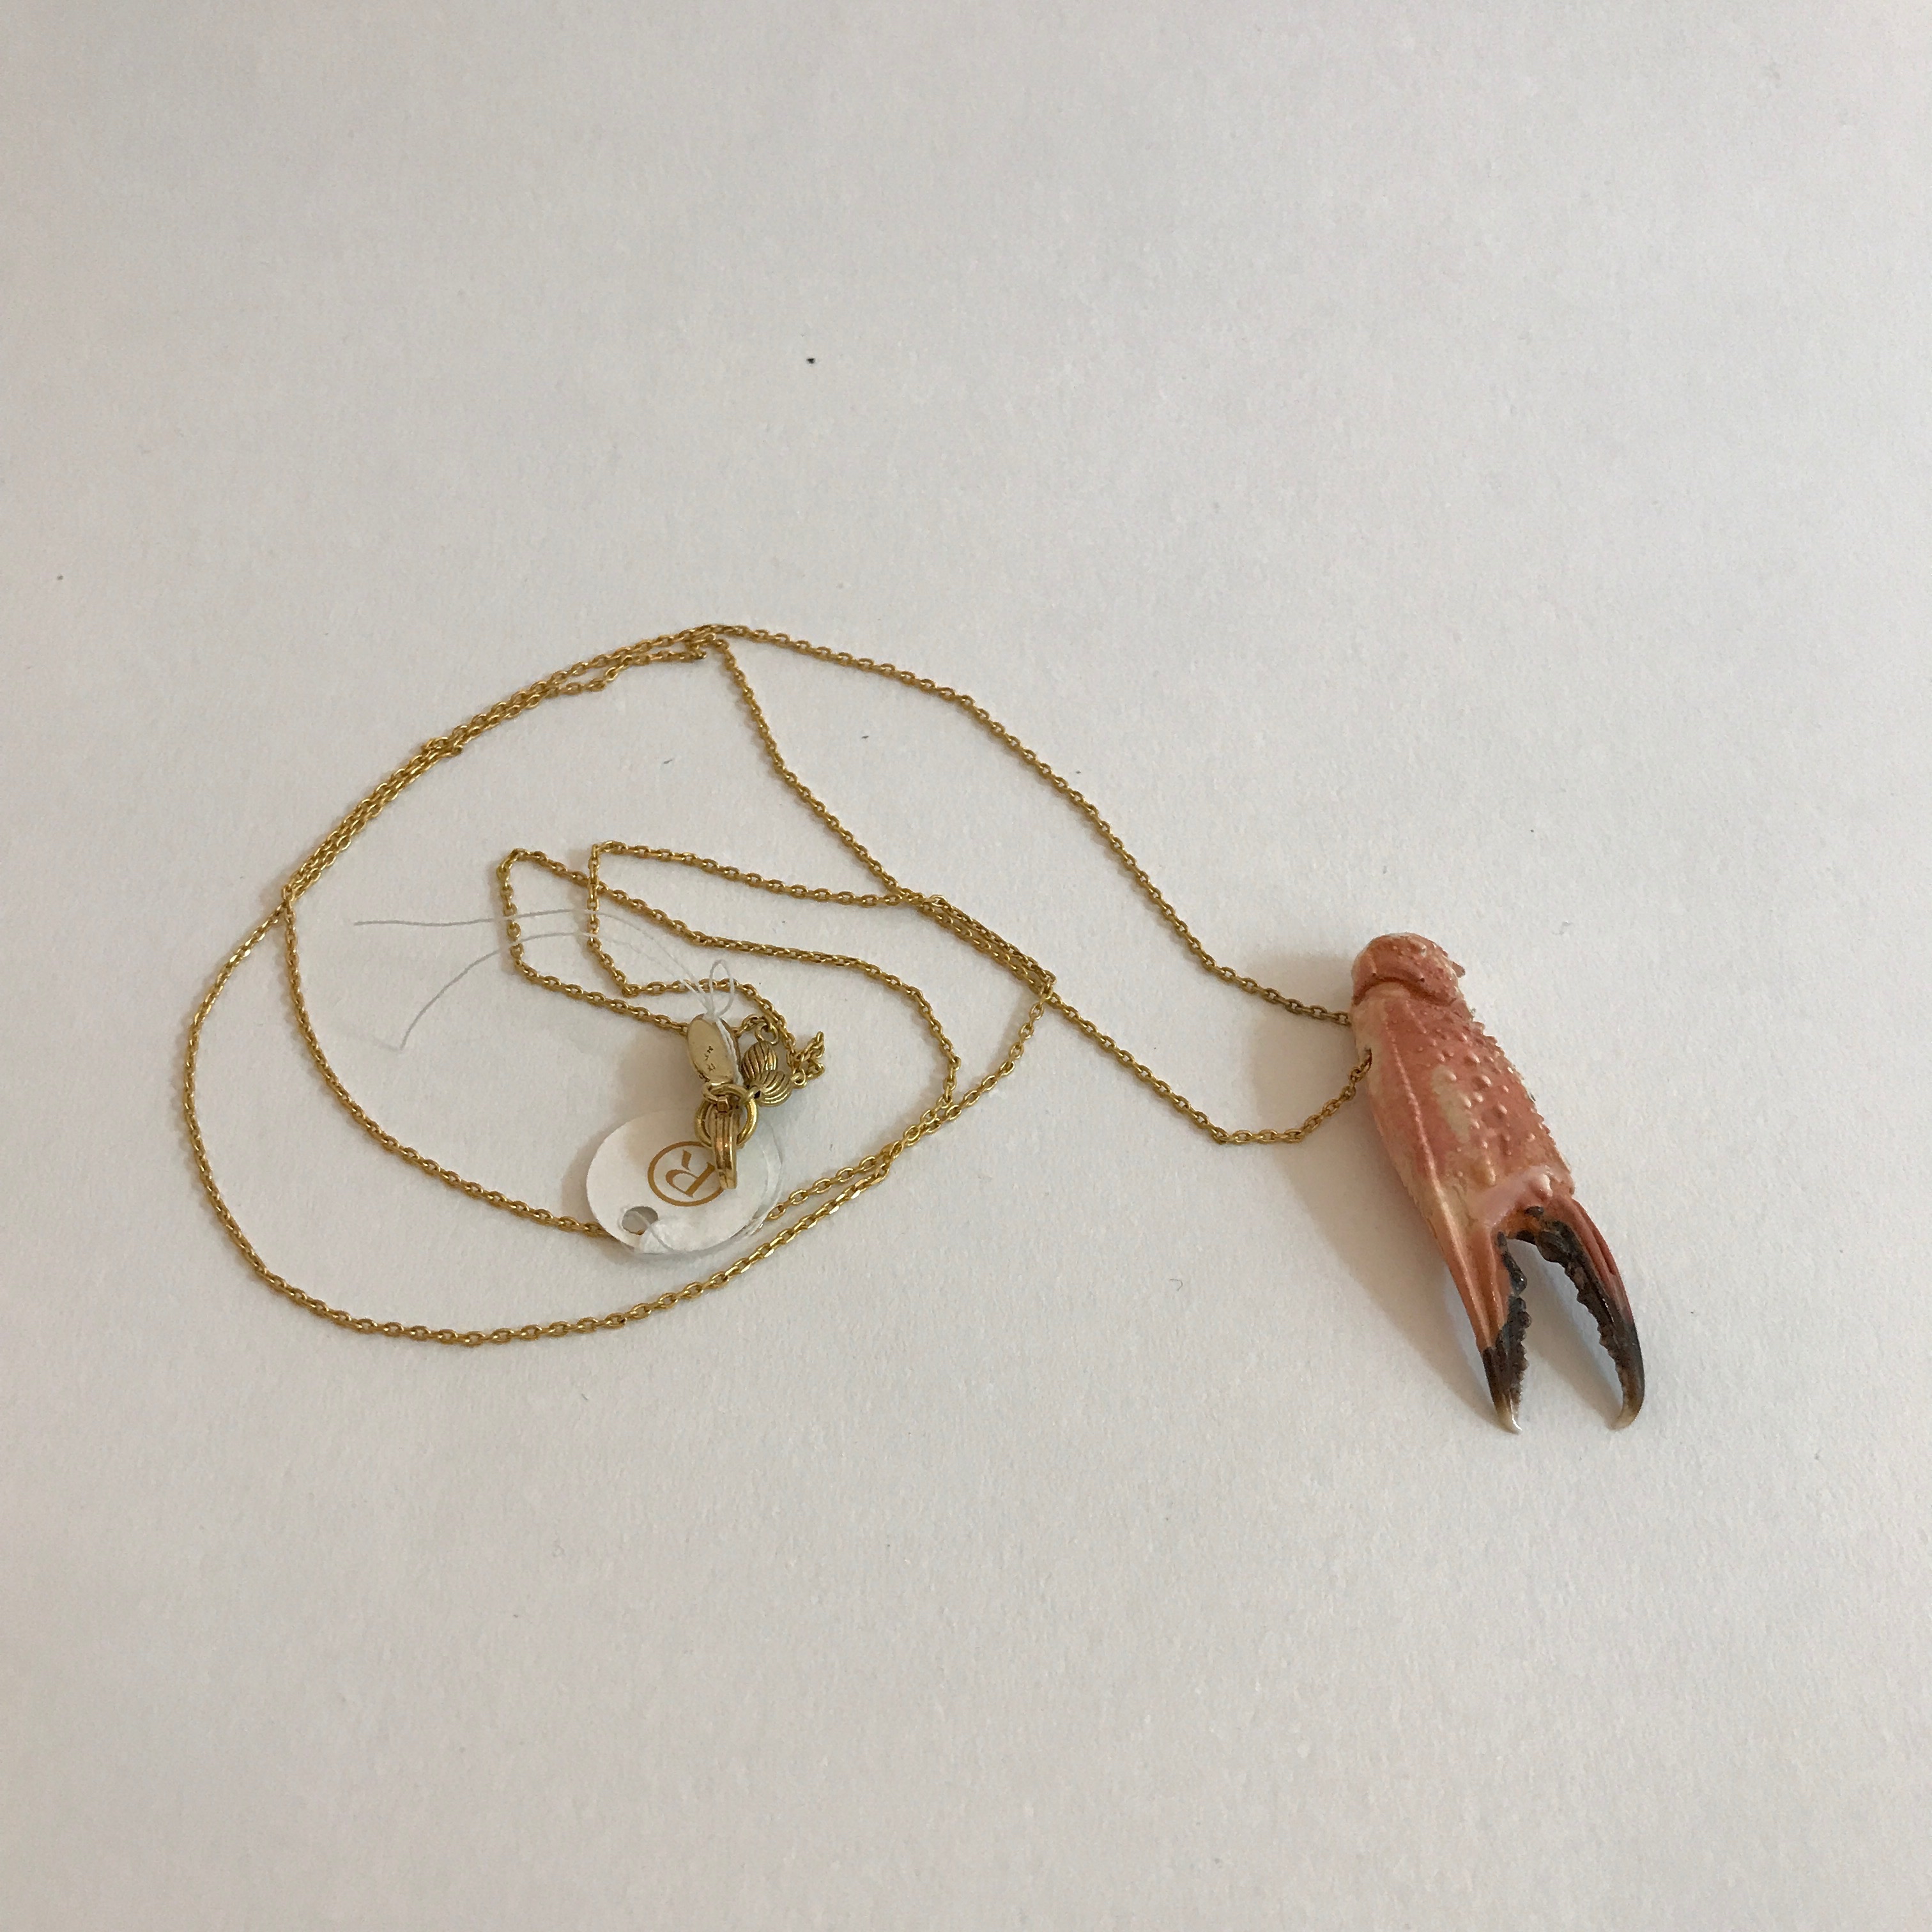 Crab claw on gold-plated necklace by Petra Reijrink Jewelry